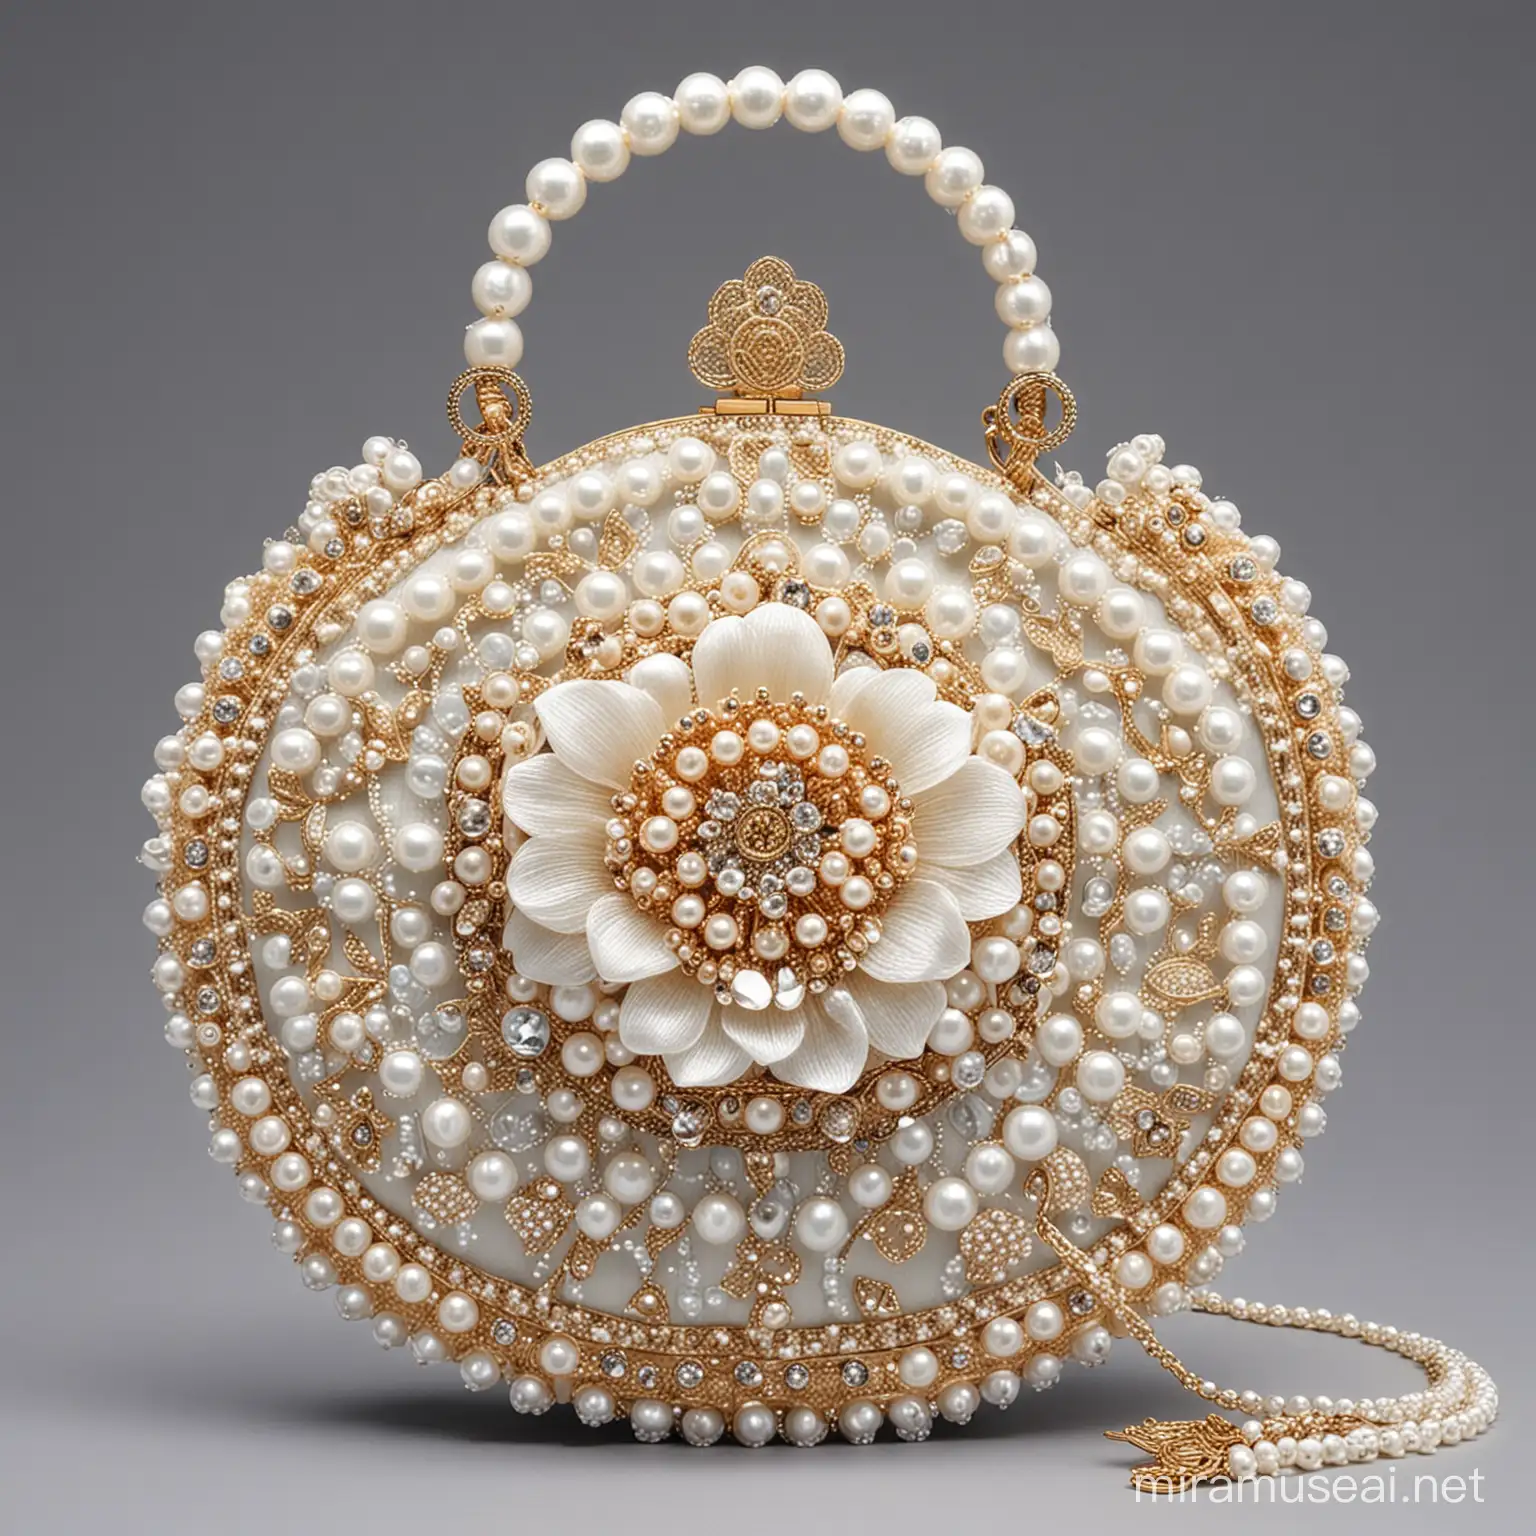 Elegant Song Dynasty Headdress Bag with Lotus Design and Pearls